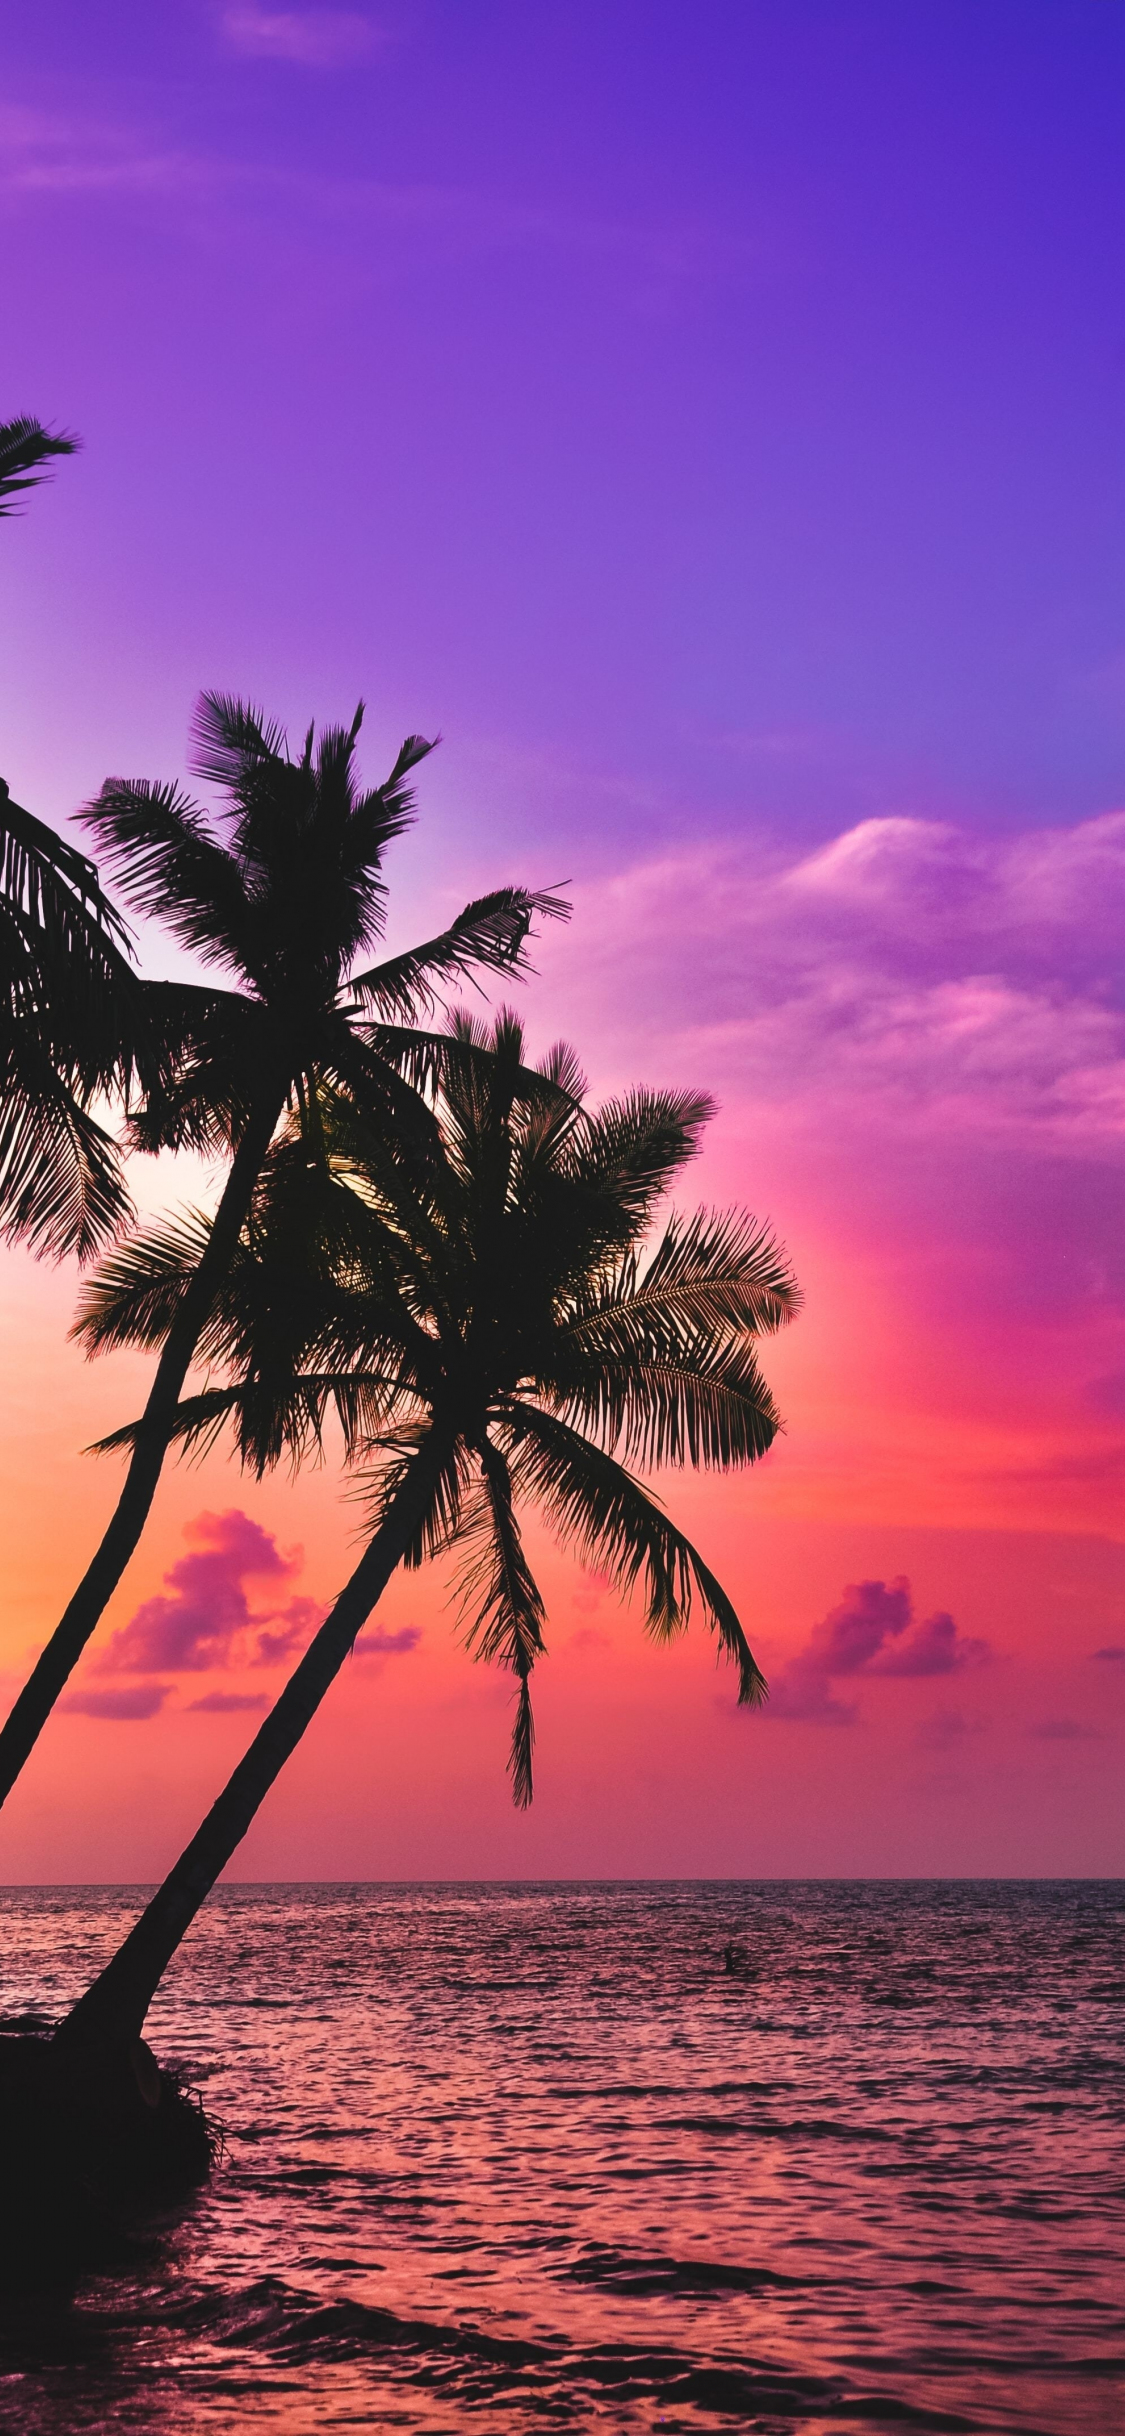 Download tropical island, beach, pink sky, sunset, palms 1125x2436 wallpaper, iphone x, 1125x2436 HD image, background, 21802